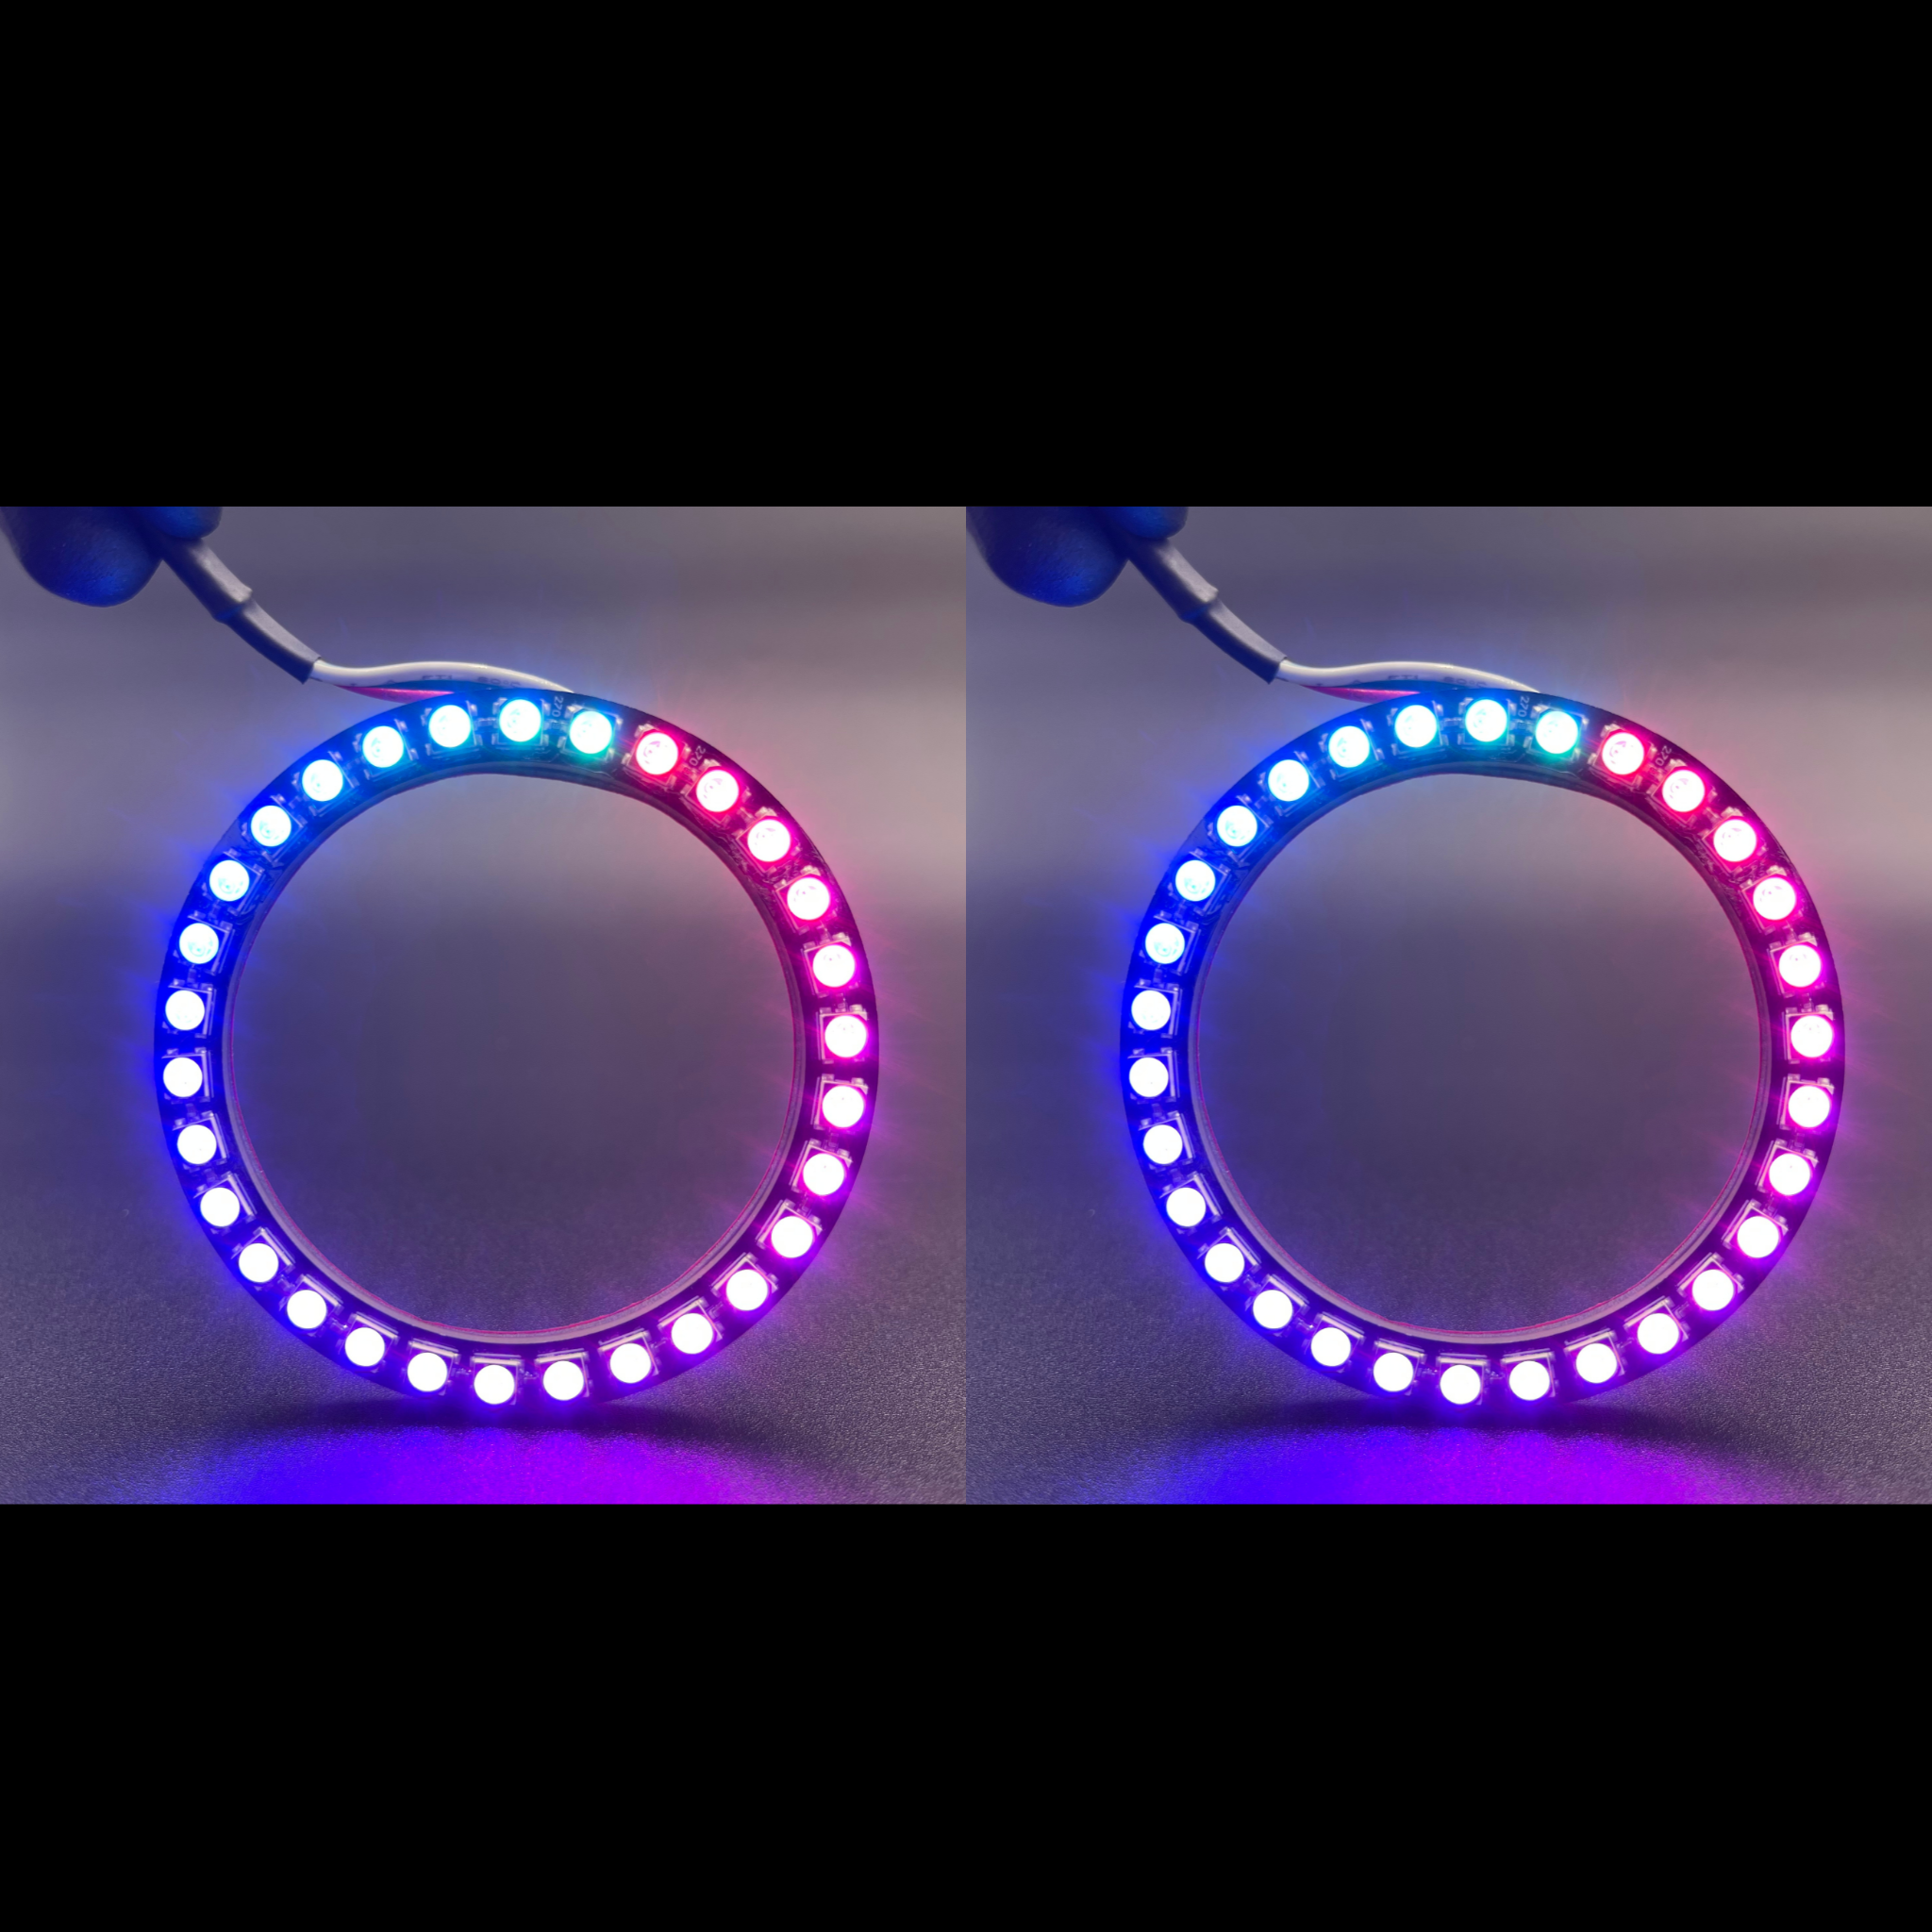 2004-2010 Mercedes CLS W219 Multicolor Halo Kit - RGB Halo Kits Multicolor Flow Series Color Chasing RGBWA LED headlight kit Colorshift Oracle Lighting Trendz OneUpLighting Morimoto theretrofitsource AutoLEDTech Diode Dynamics